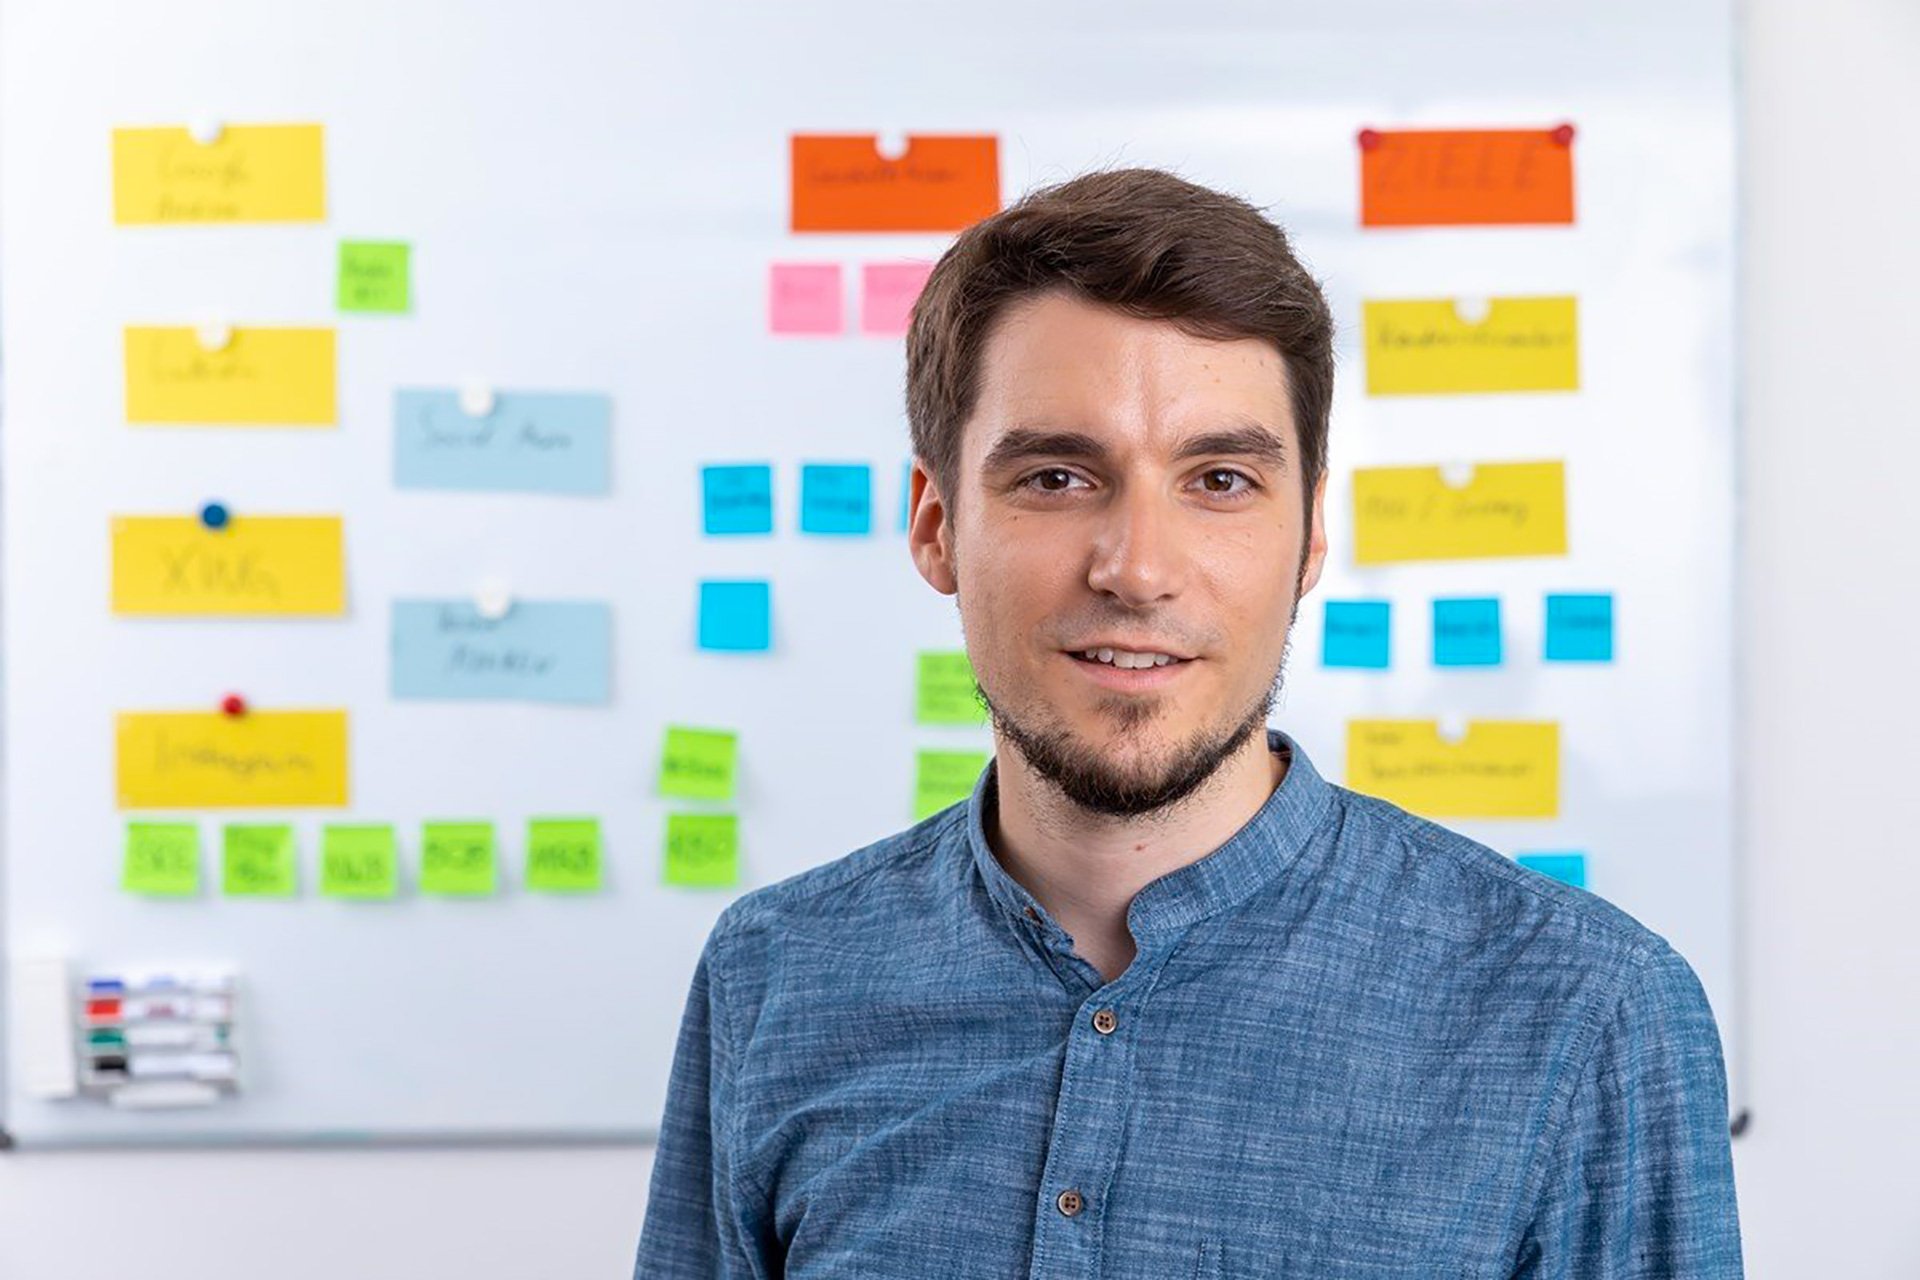 man wearing a blue shirt in front of a blurred board brainstorming marketing study